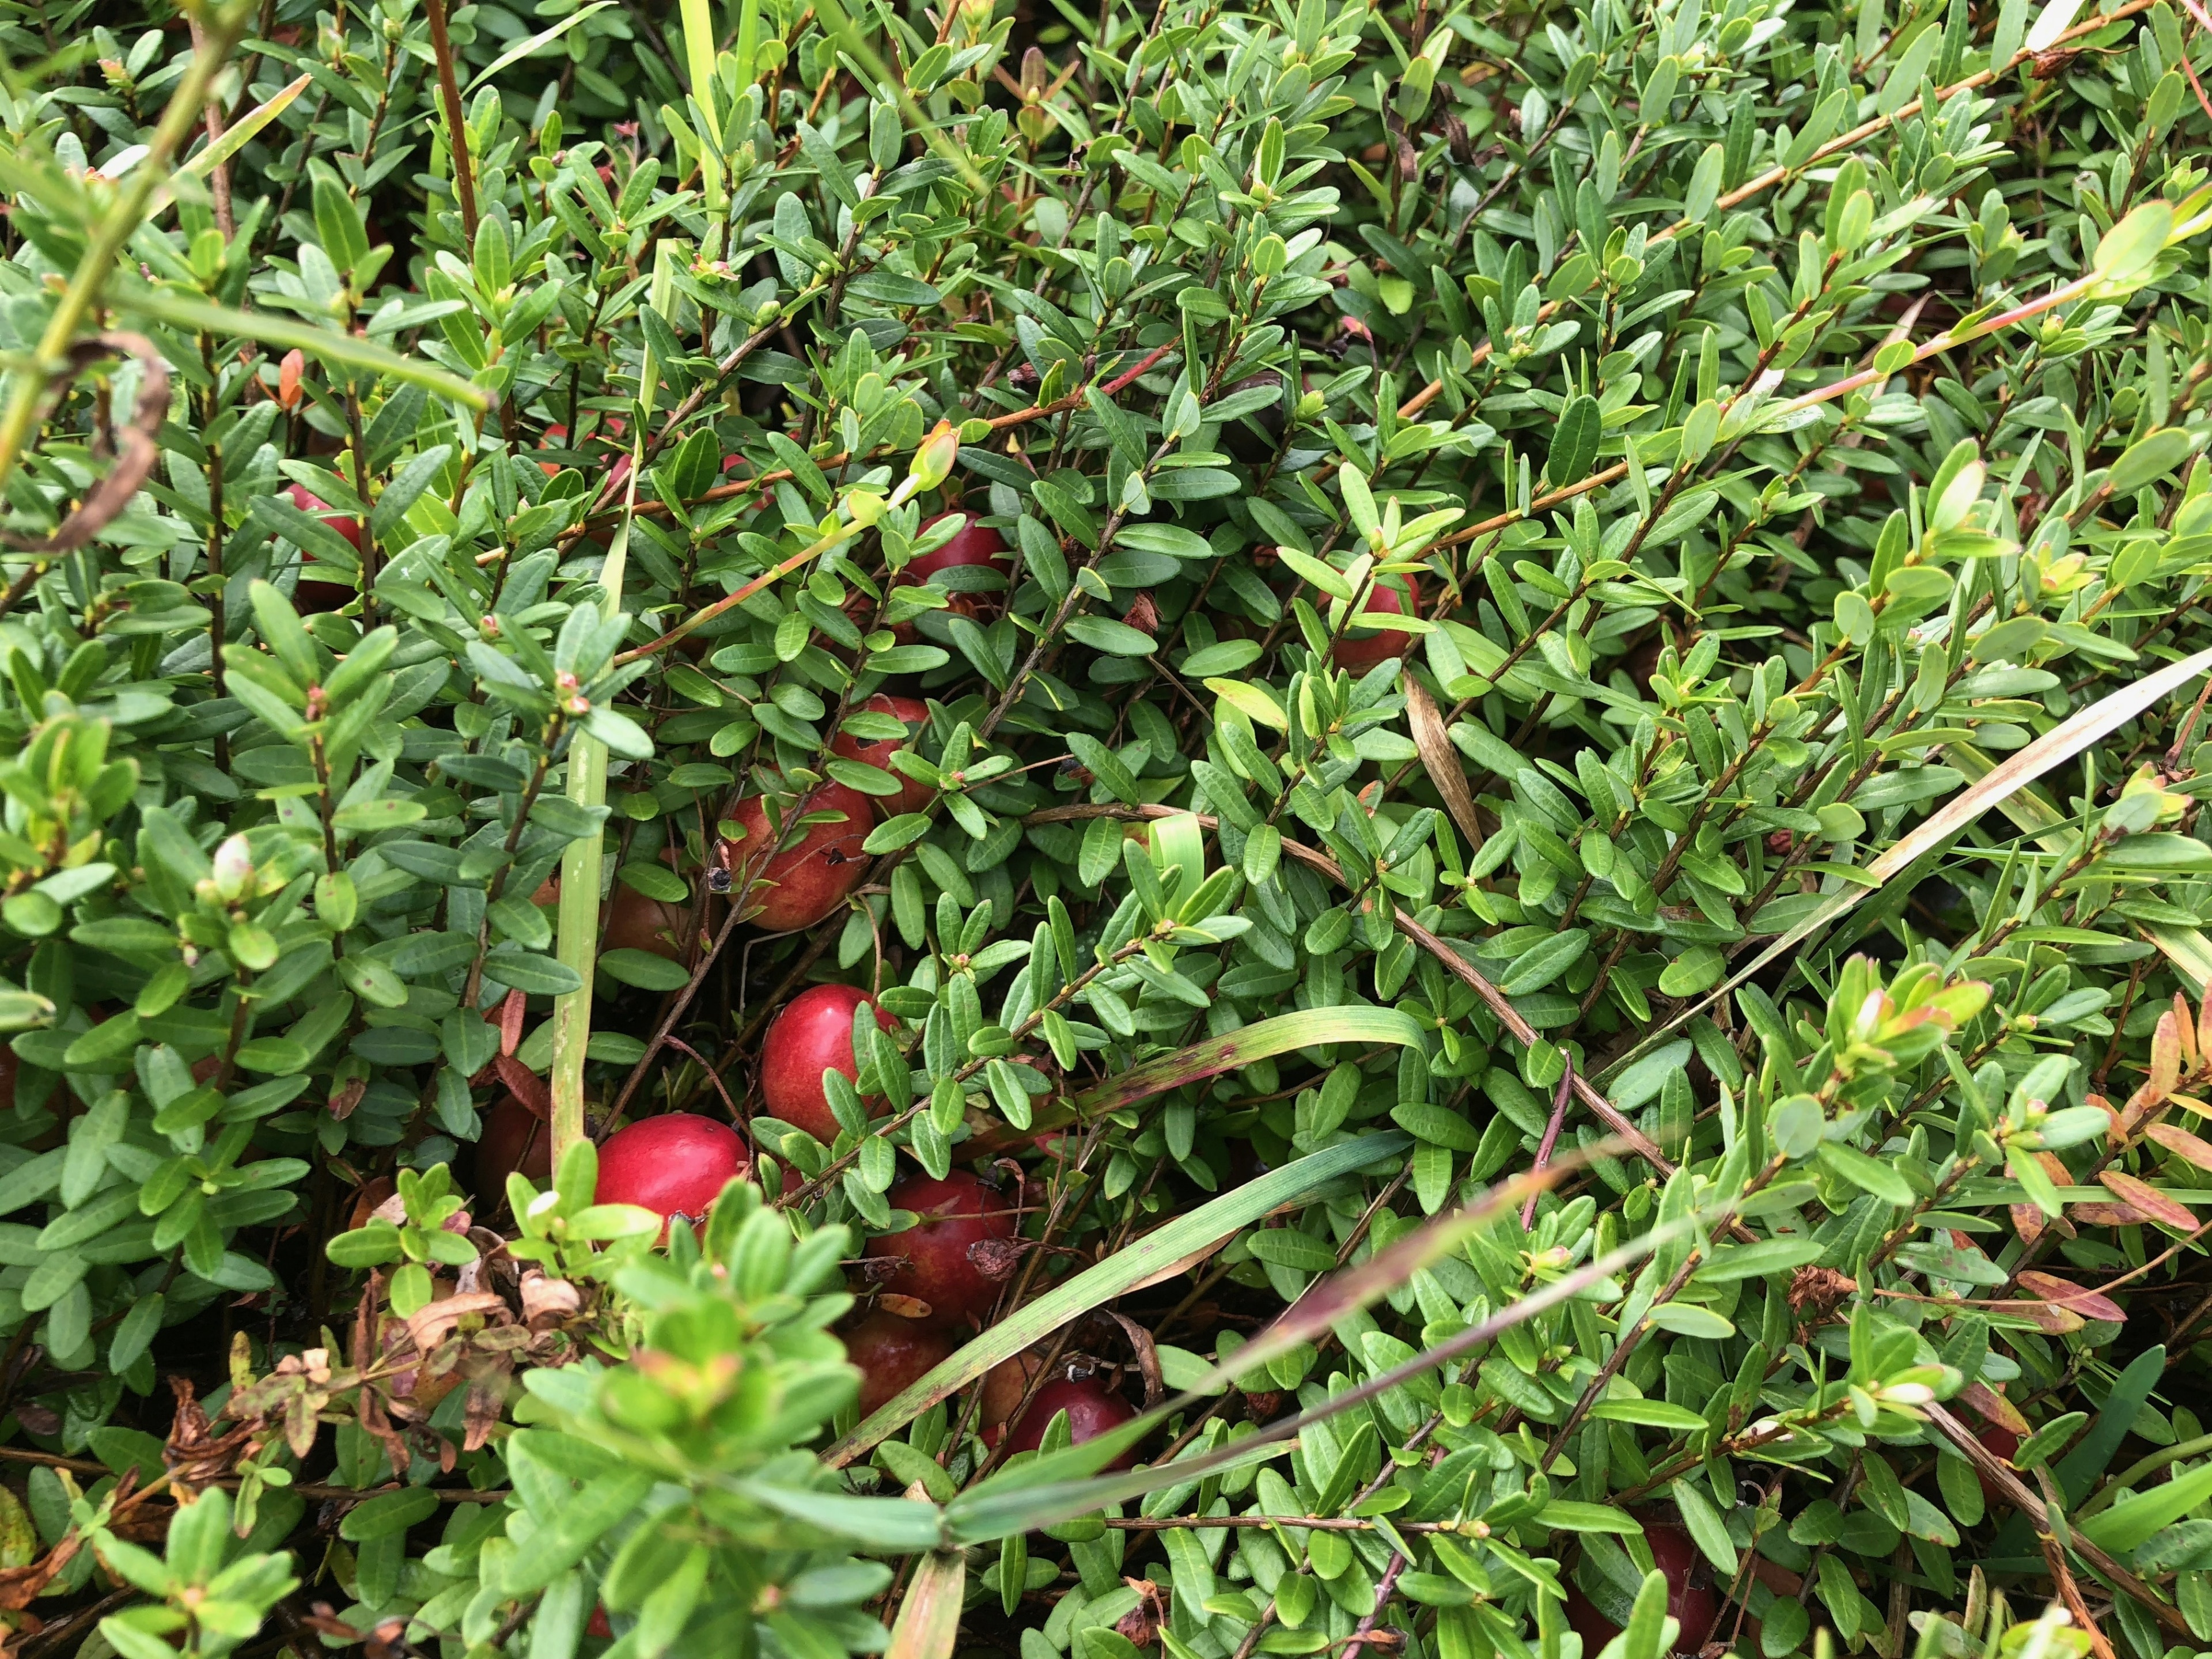 Look close to find the cranberries in the bushes. 